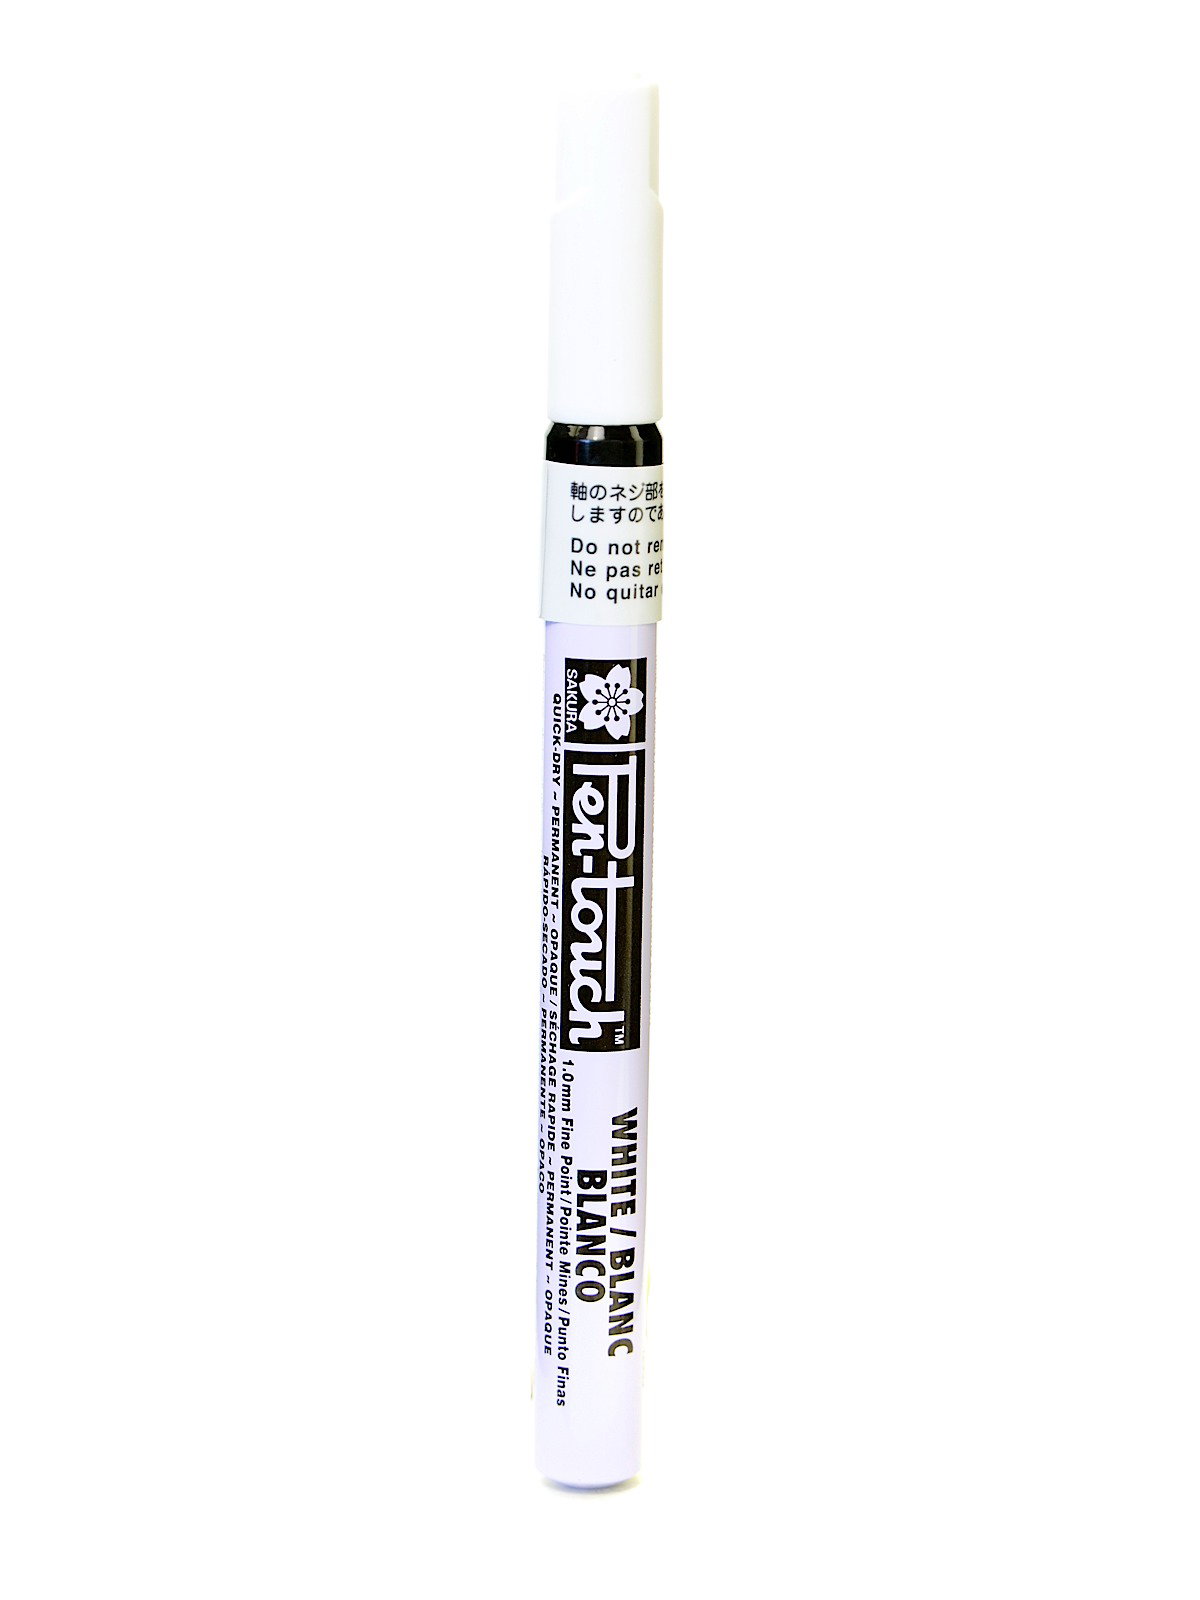 SAKURA Pen touch Permanent Markers - Pack of 3 markers -  Gold, Silver & White (Extra Fine Point) - Paint Marker